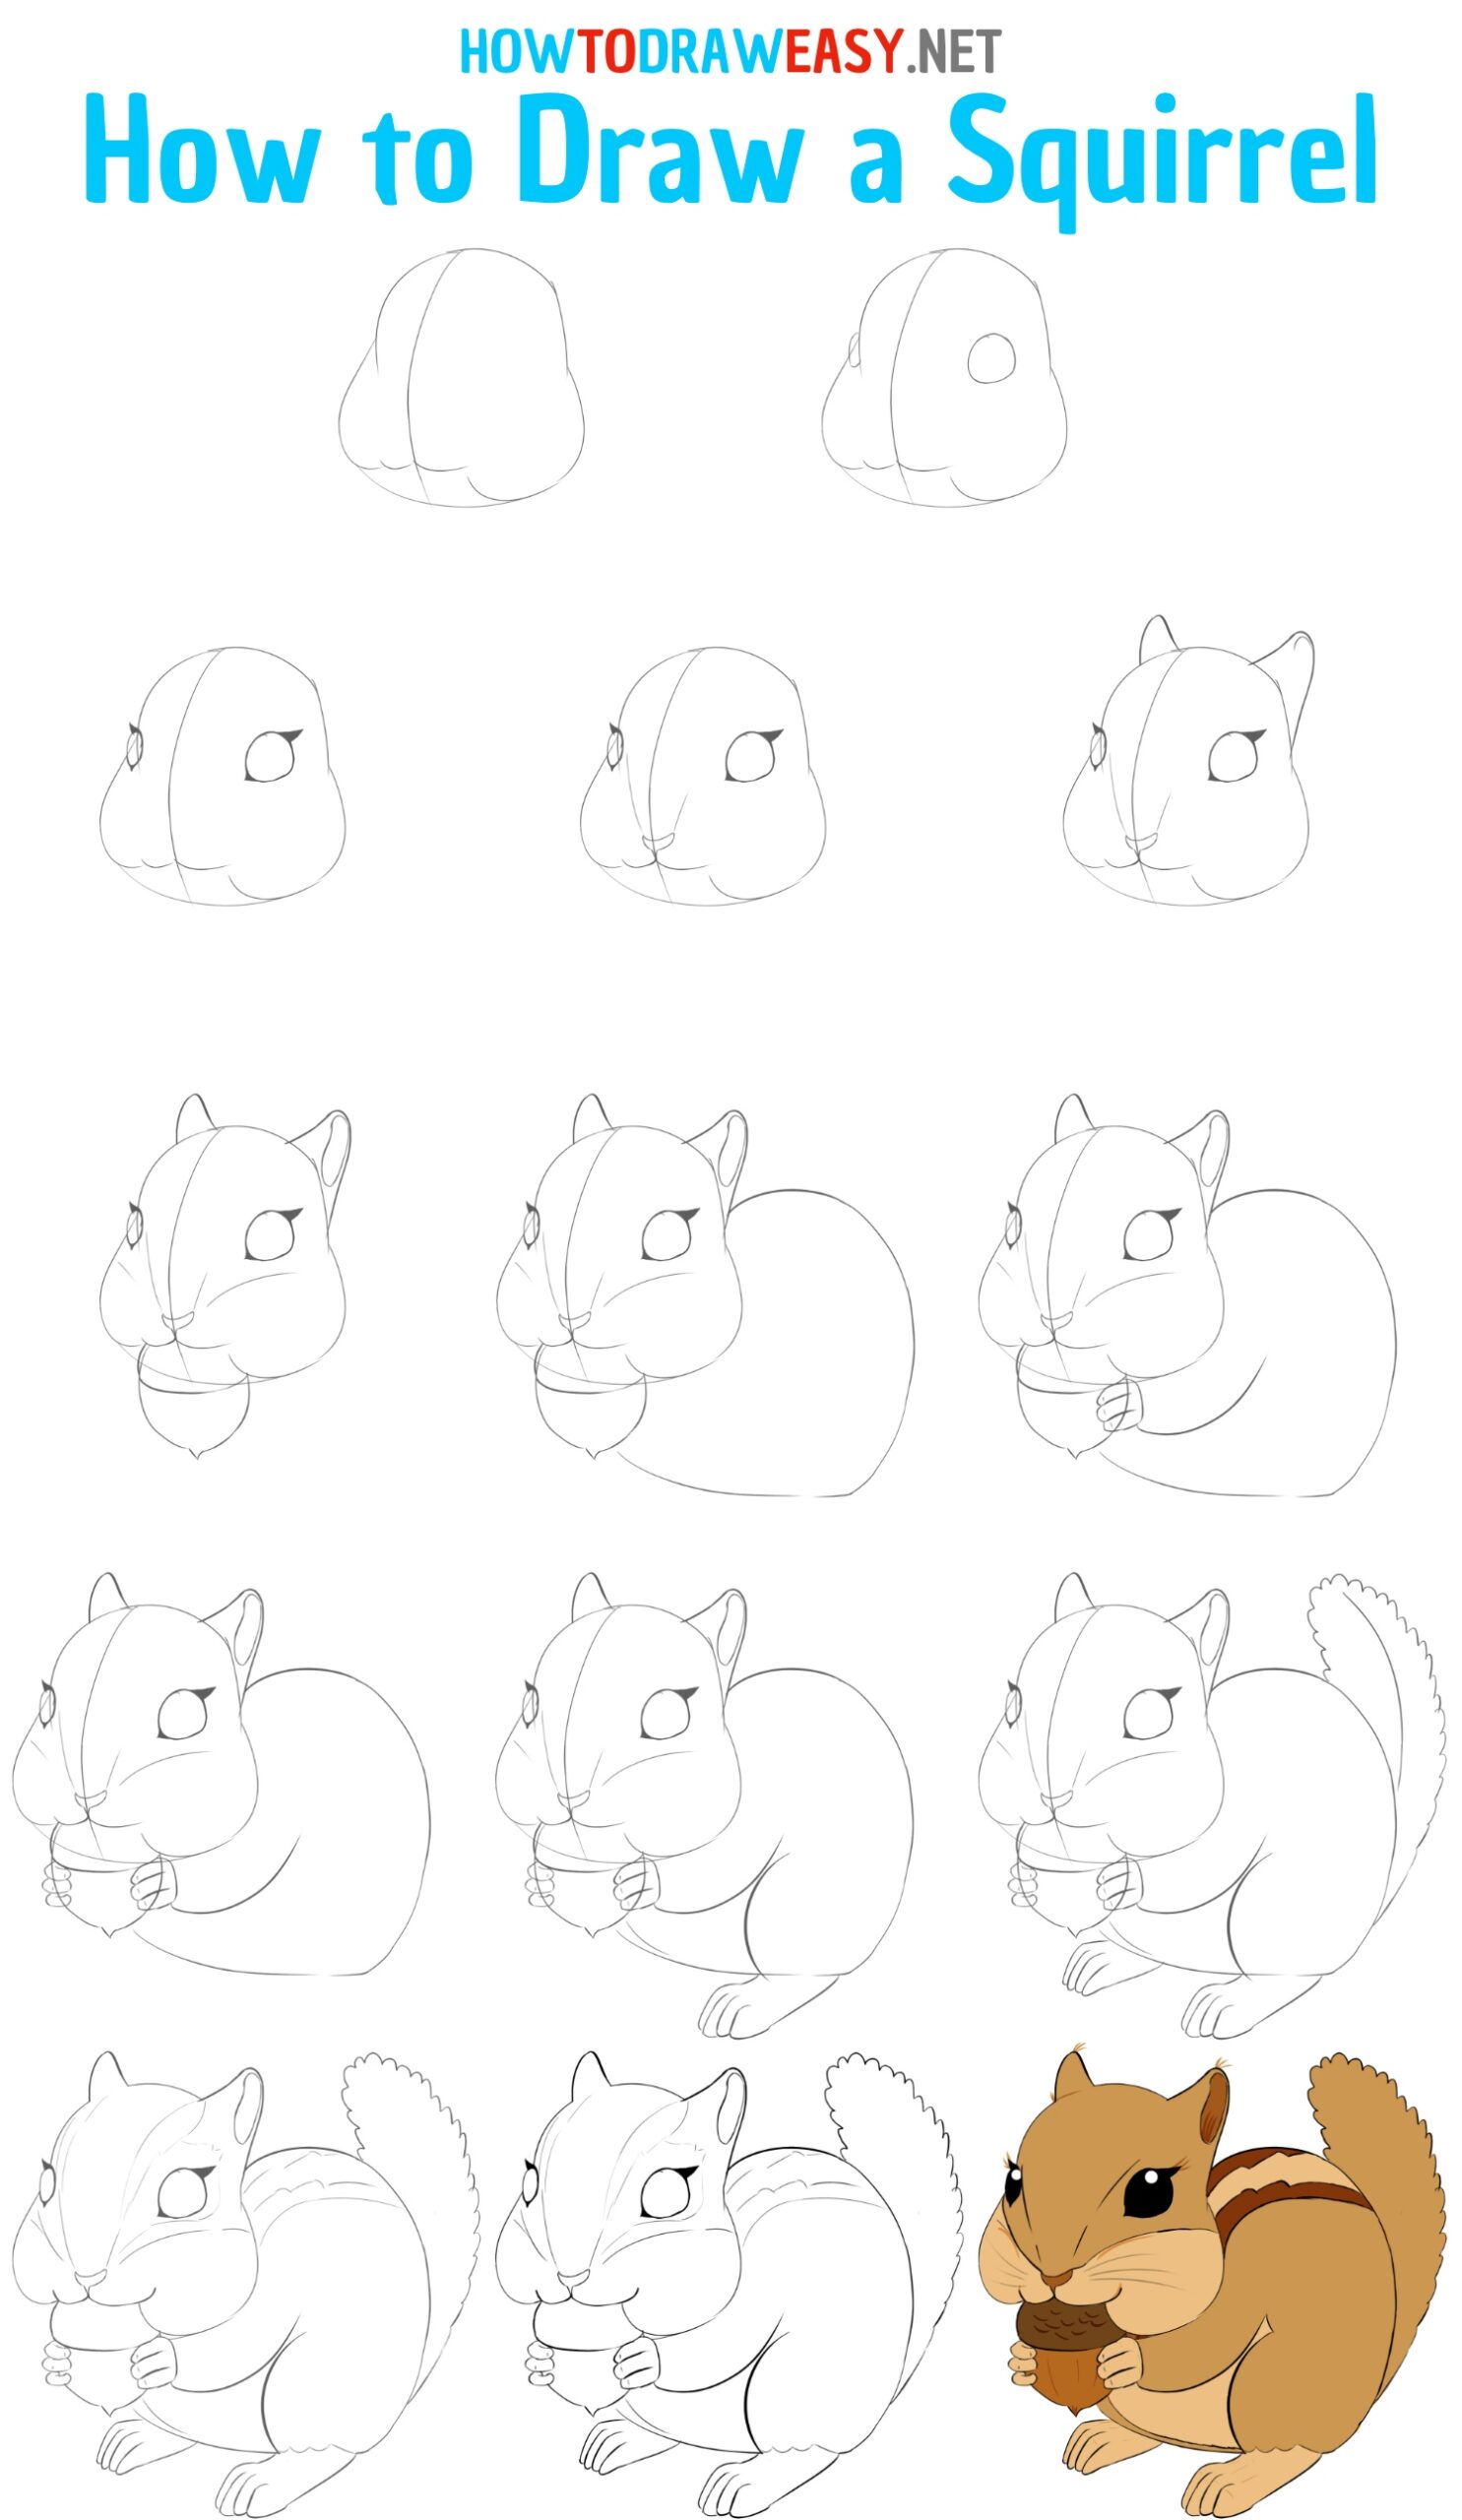 How to Draw a Squirrel Step by Step